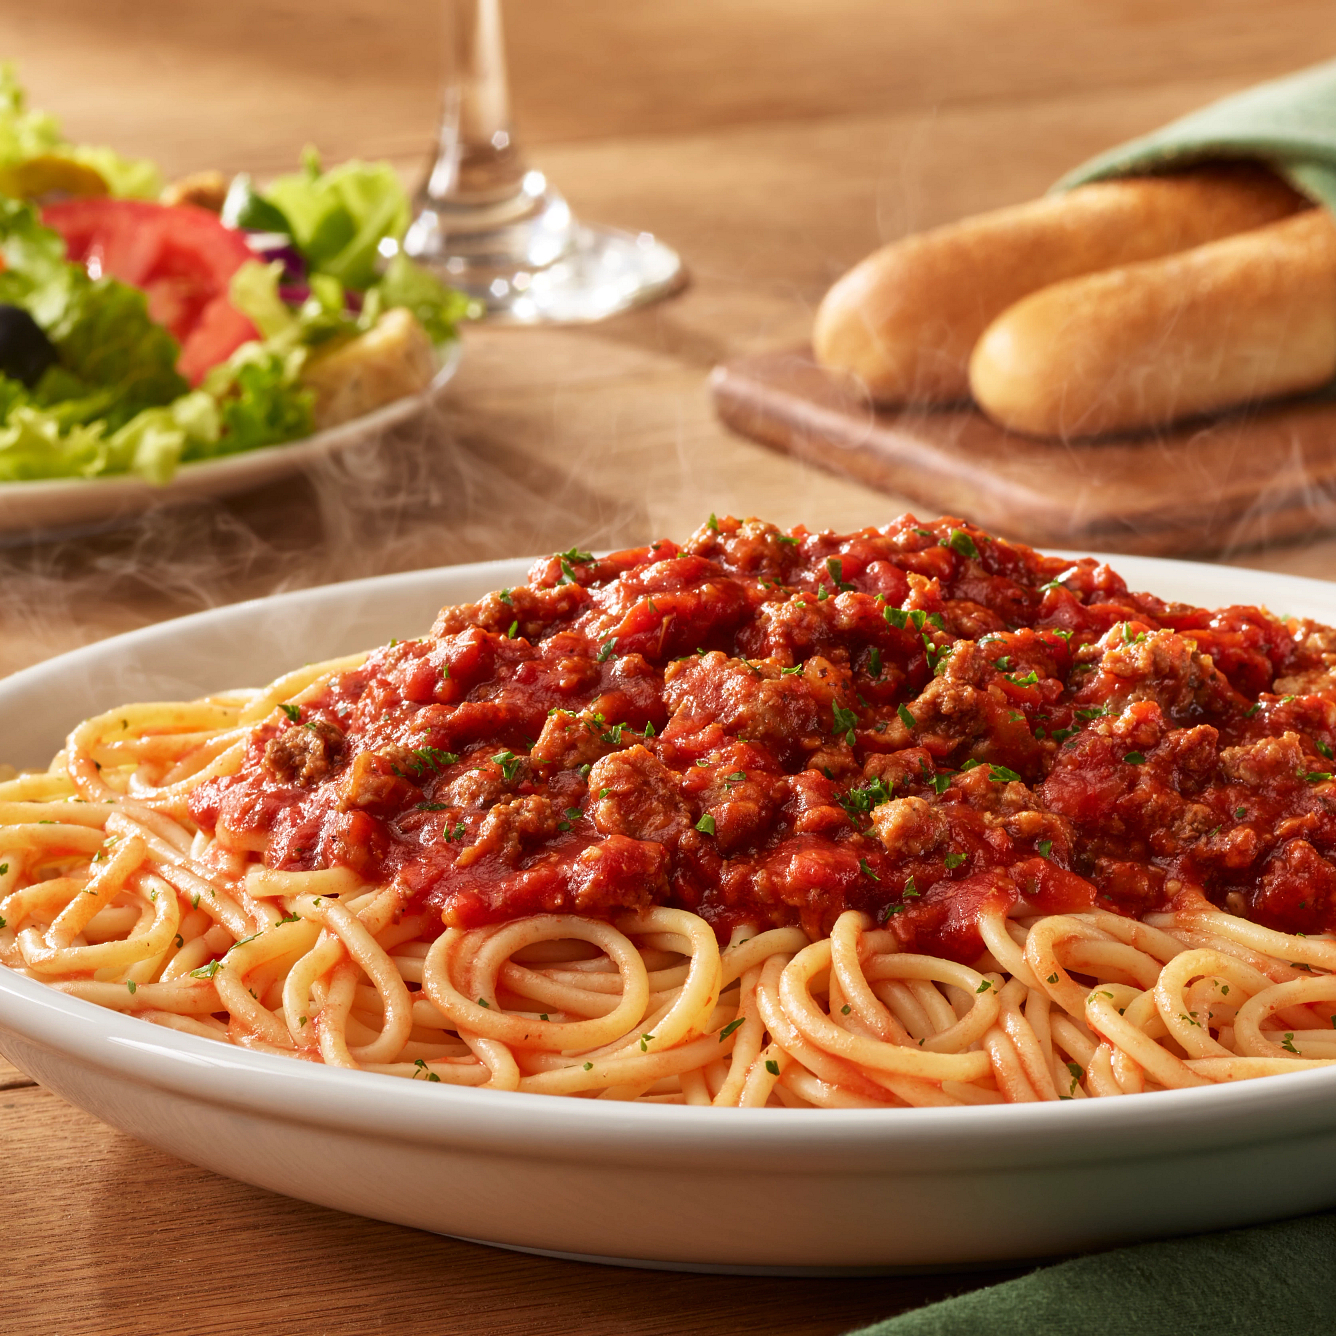 Spaghetti: Topped with your choice of homemade marinara or meat sauce prepared fresh daily.